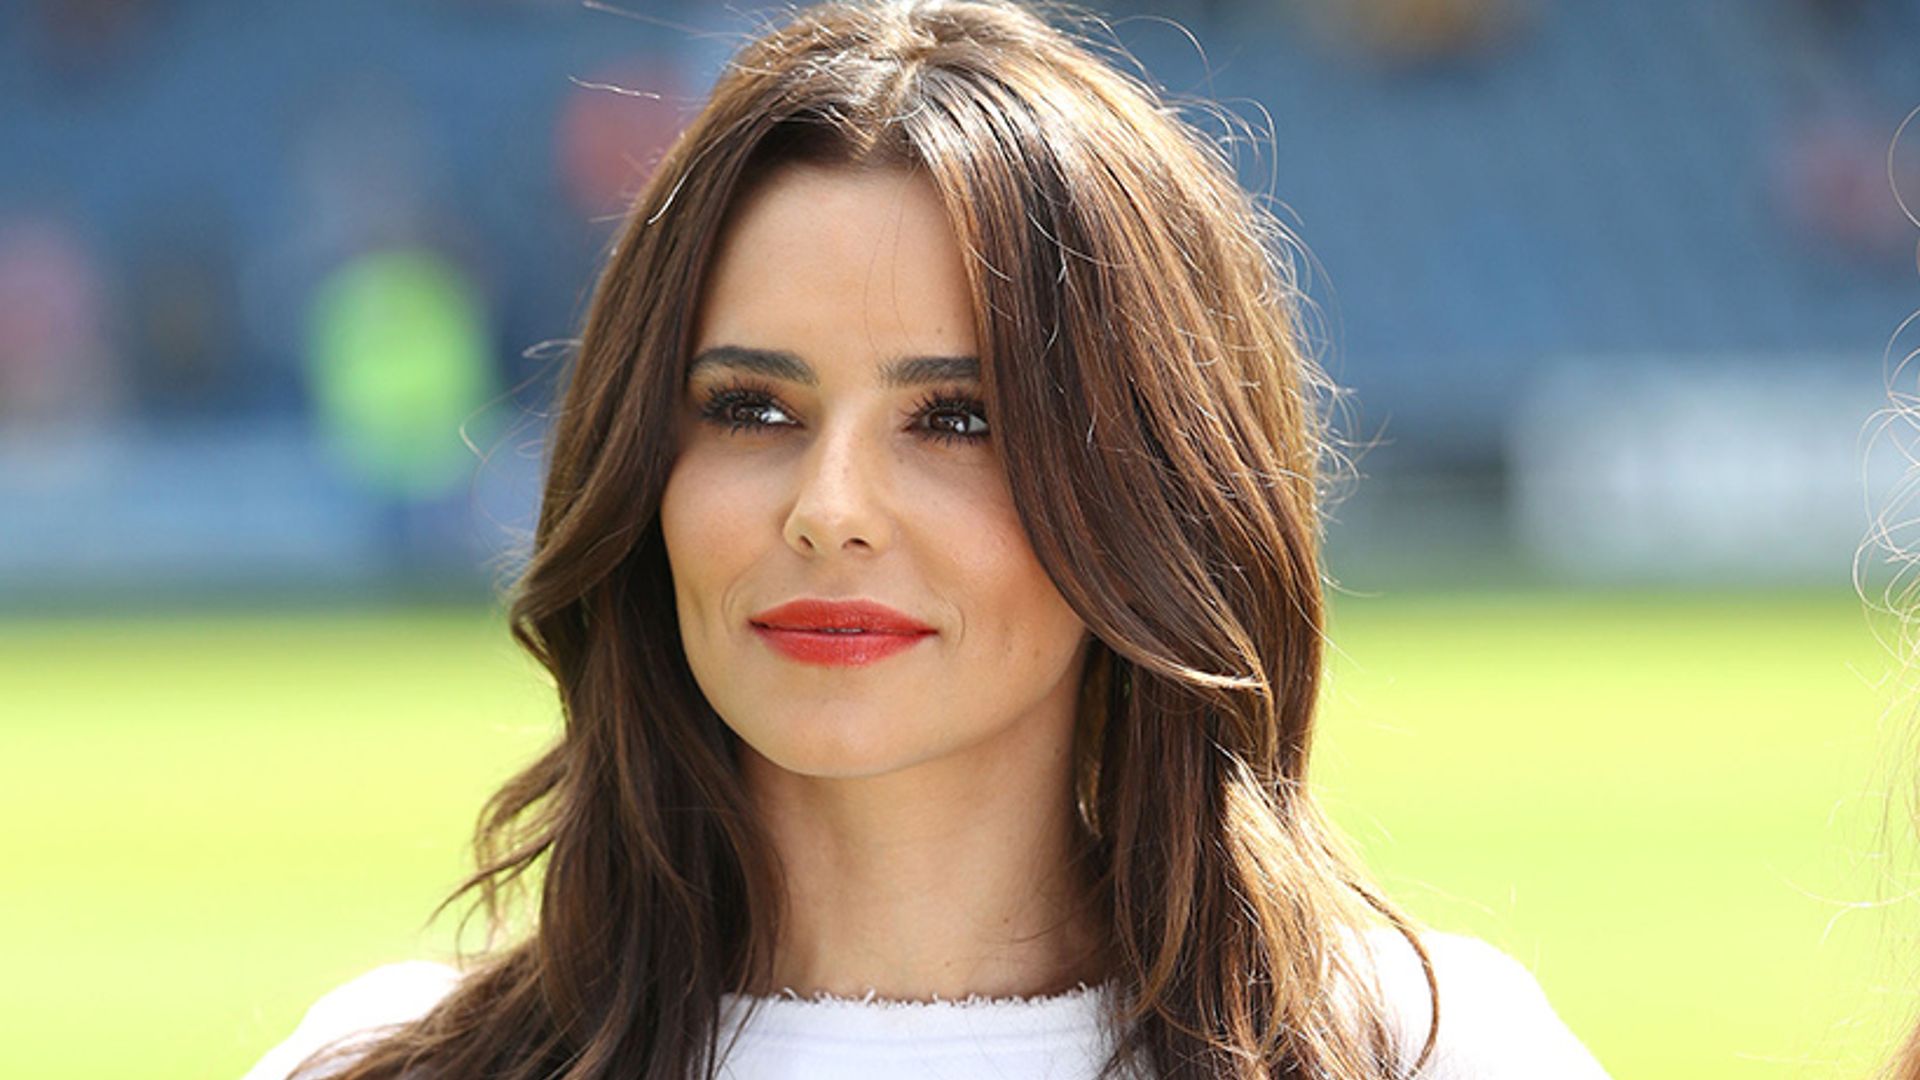 Cheryl gives her first TV interview since becoming a mum: watch the trailer!